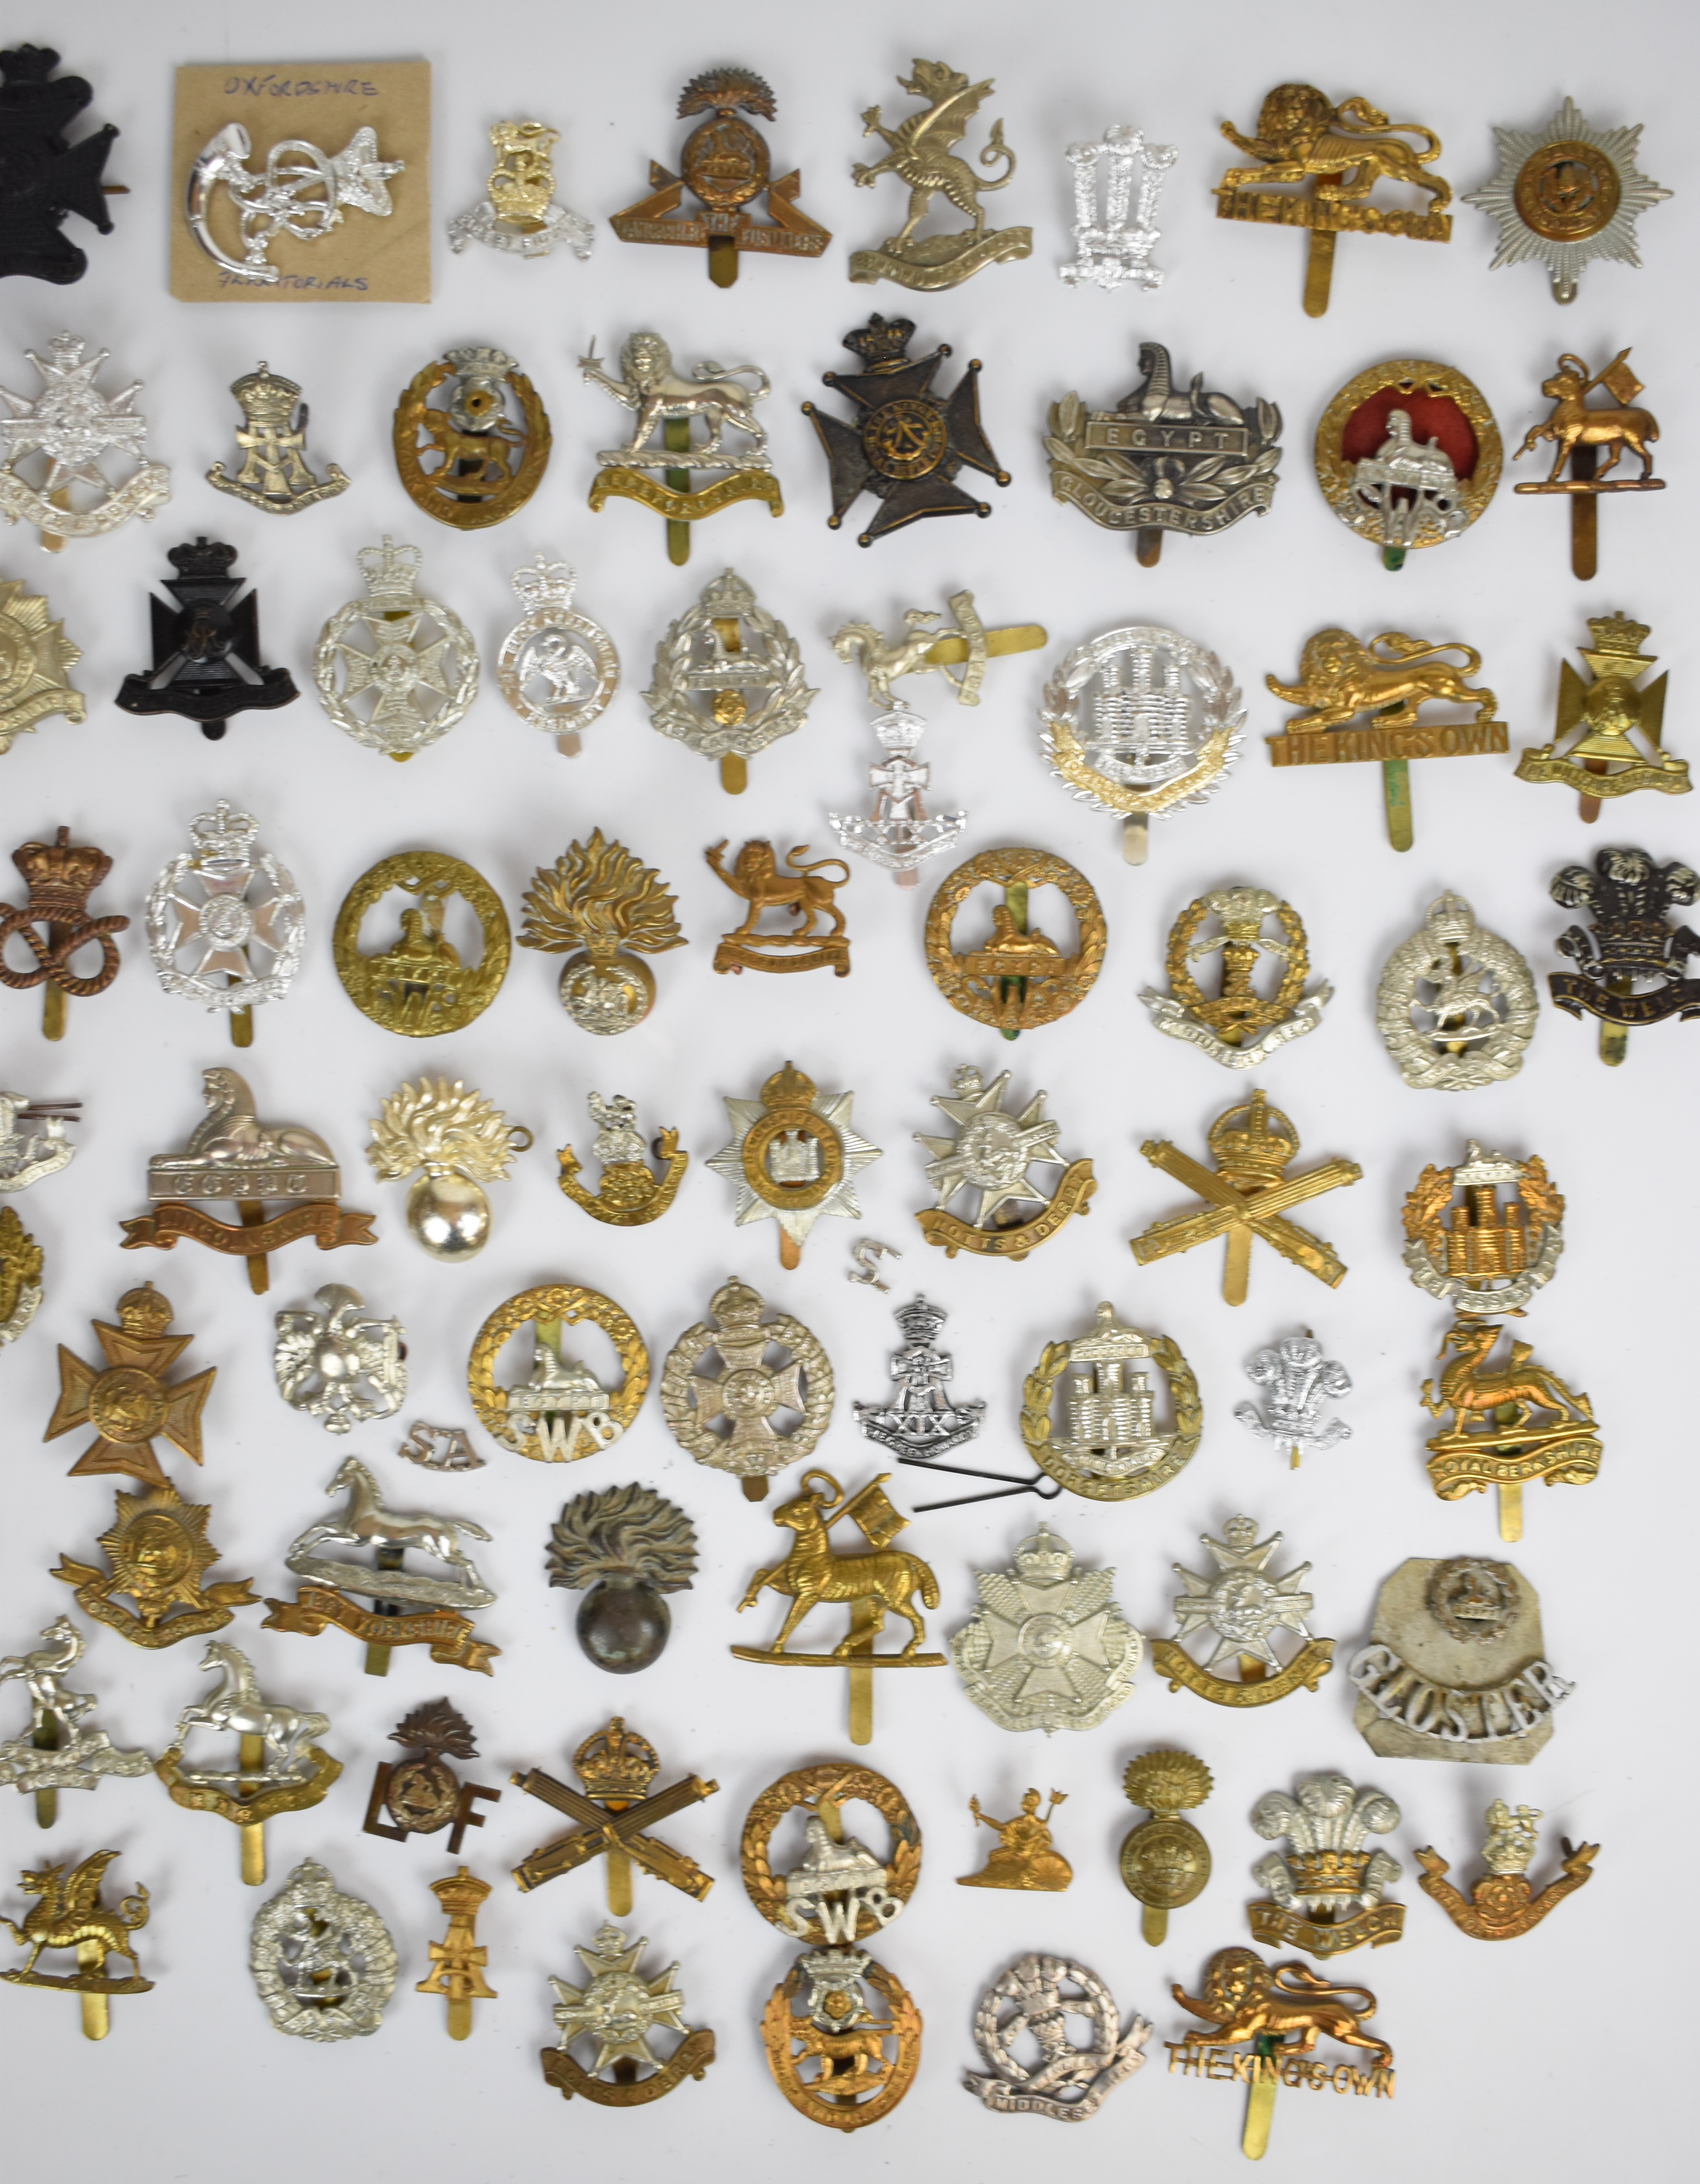 Large collection of approximately 100 British Army cap badges including Lancashire Fusiliers, - Image 3 of 3